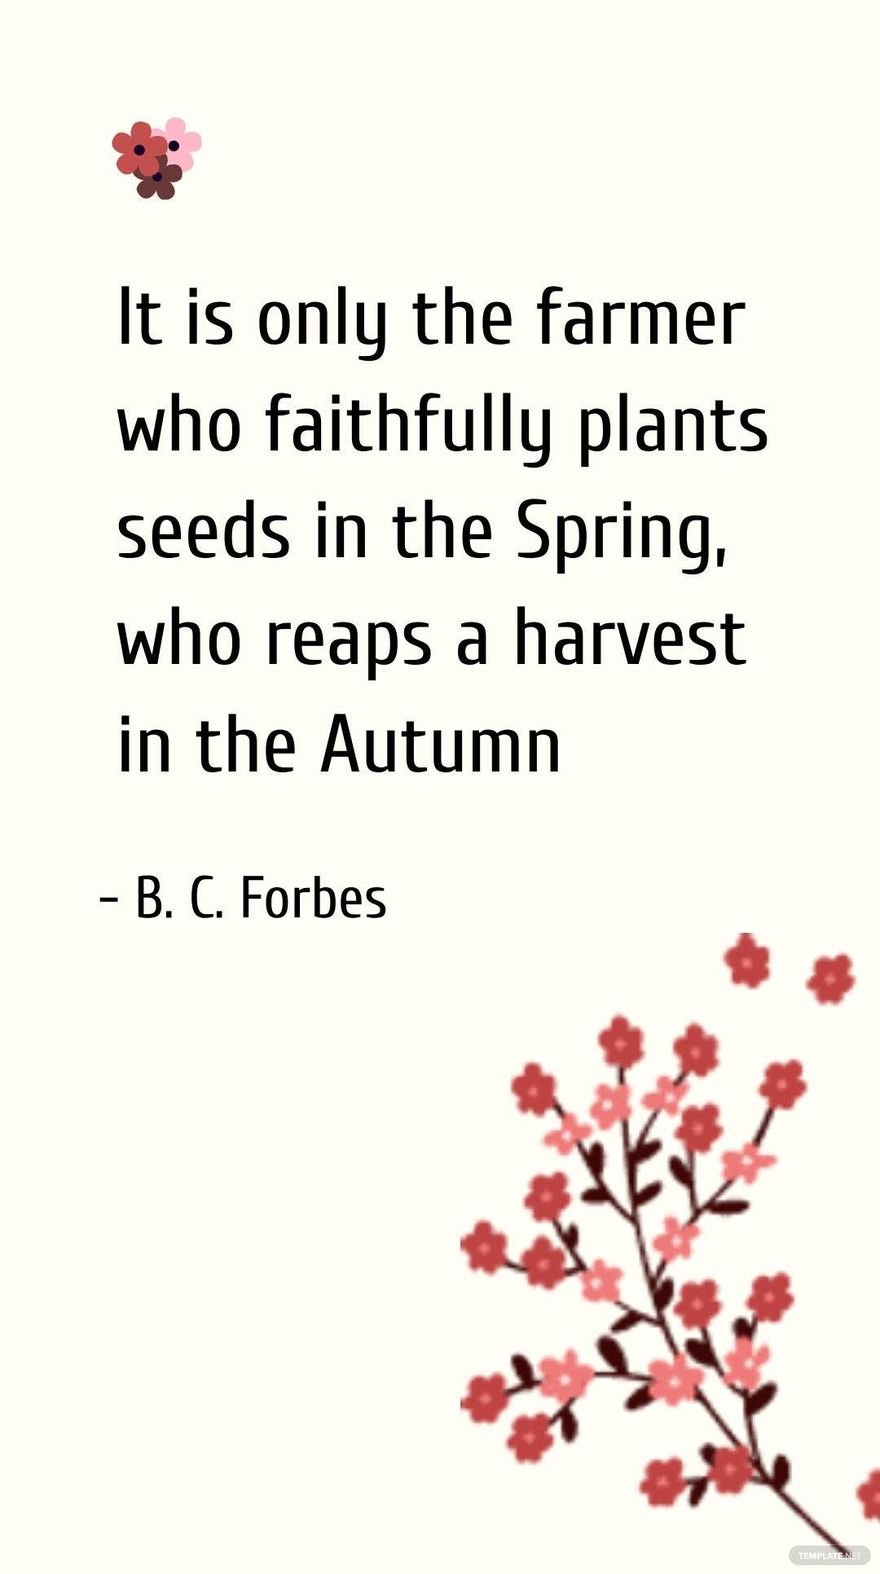 B. C. Forbes - It is only the farmer who faithfully plants seeds in the Spring, who reaps a harvest in the Autumn